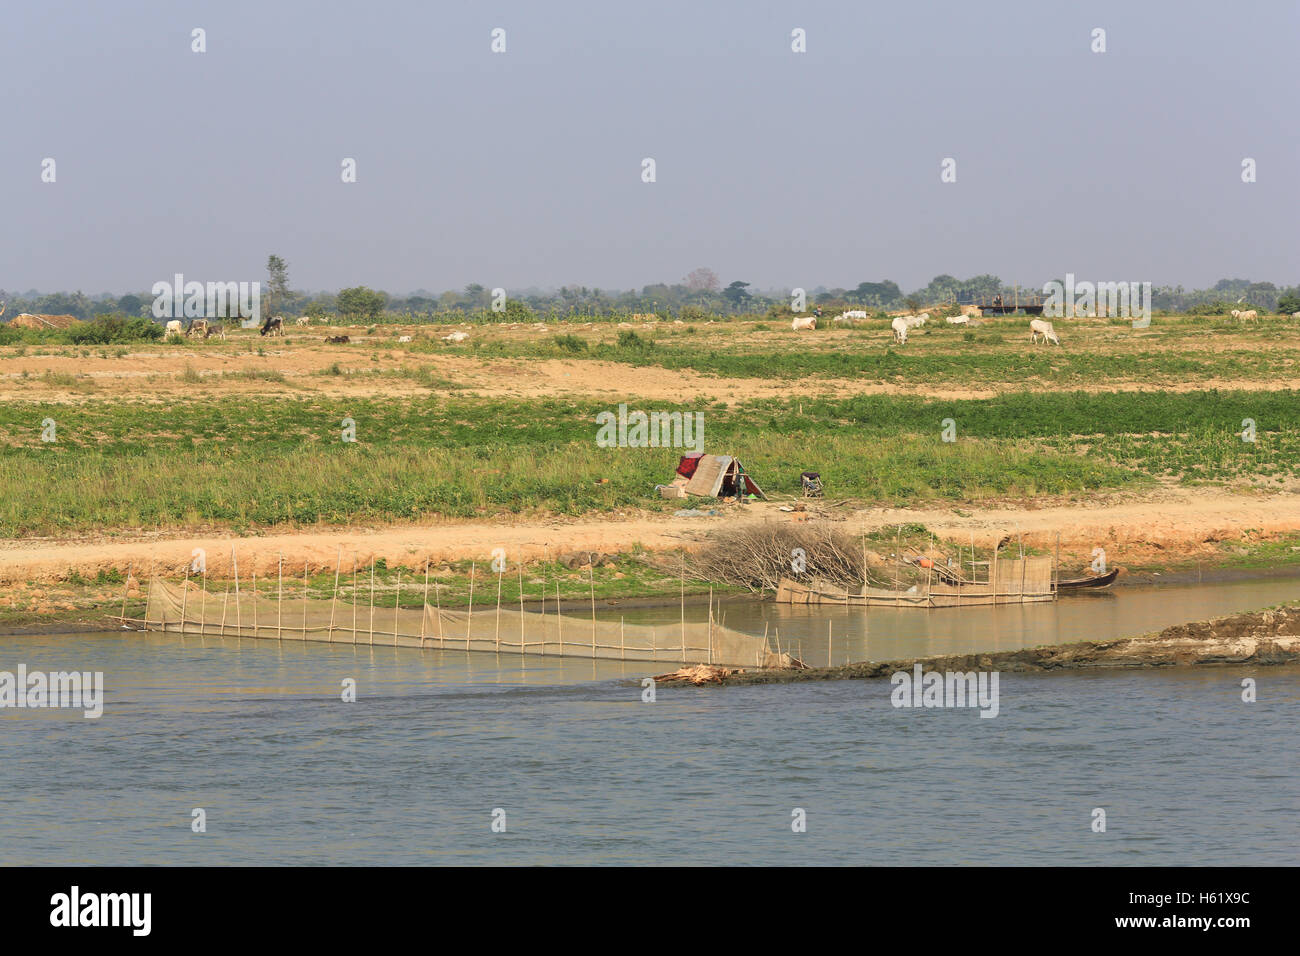 Fishermen use nets to trap fish on the Irrawaddy River in Myanmar. Stock Photo